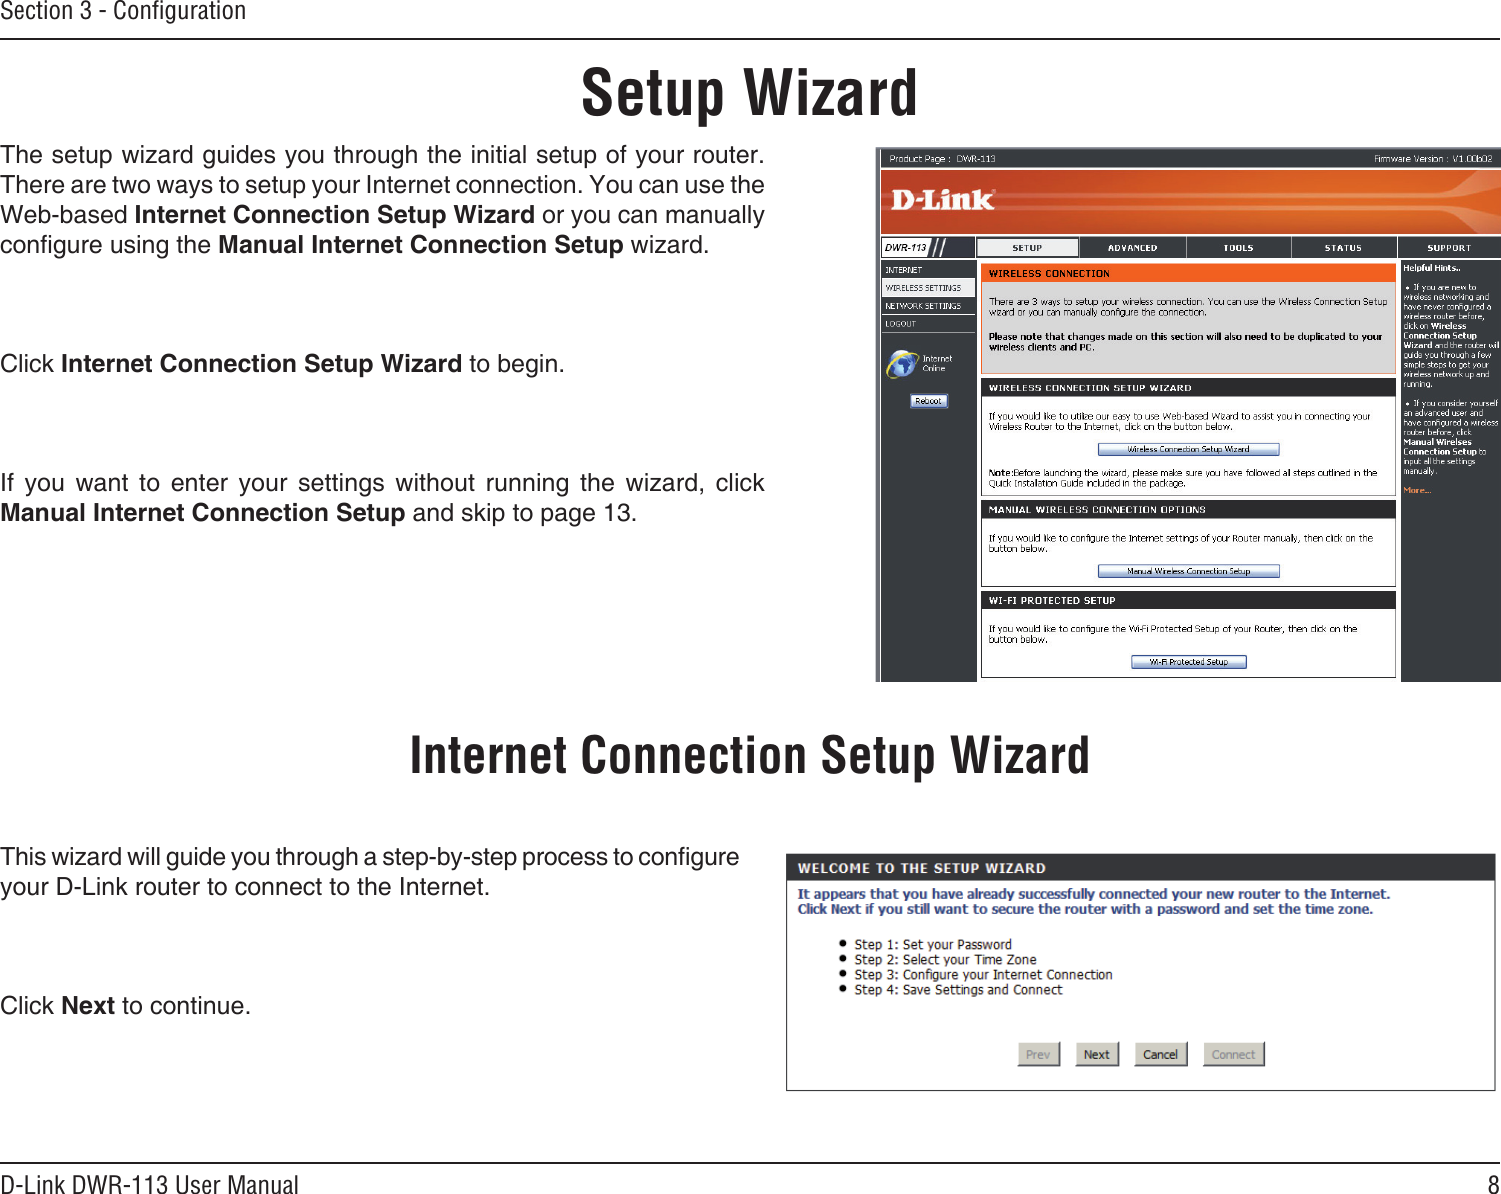 8D-Link DWR-113 User ManualSection 3 - ConﬁgurationSetup WizardThe setup wizard guides you through the initial setup of your router. There are two ways to setup your Internet connection. You can use the Web-based Internet Connection Setup Wizard or you can manually congure using the Manual Internet Connection Setup wizard.Click Internet Connection Setup Wizard to begin.If  you  want  to  enter  your  settings  without  running  the  wizard,  click Manual Internet Connection Setup and skip to page 13.This wizard will guide you through a step-by-step process to congure your D-Link router to connect to the Internet.Click Next to continue.Internet Connection Setup Wizard